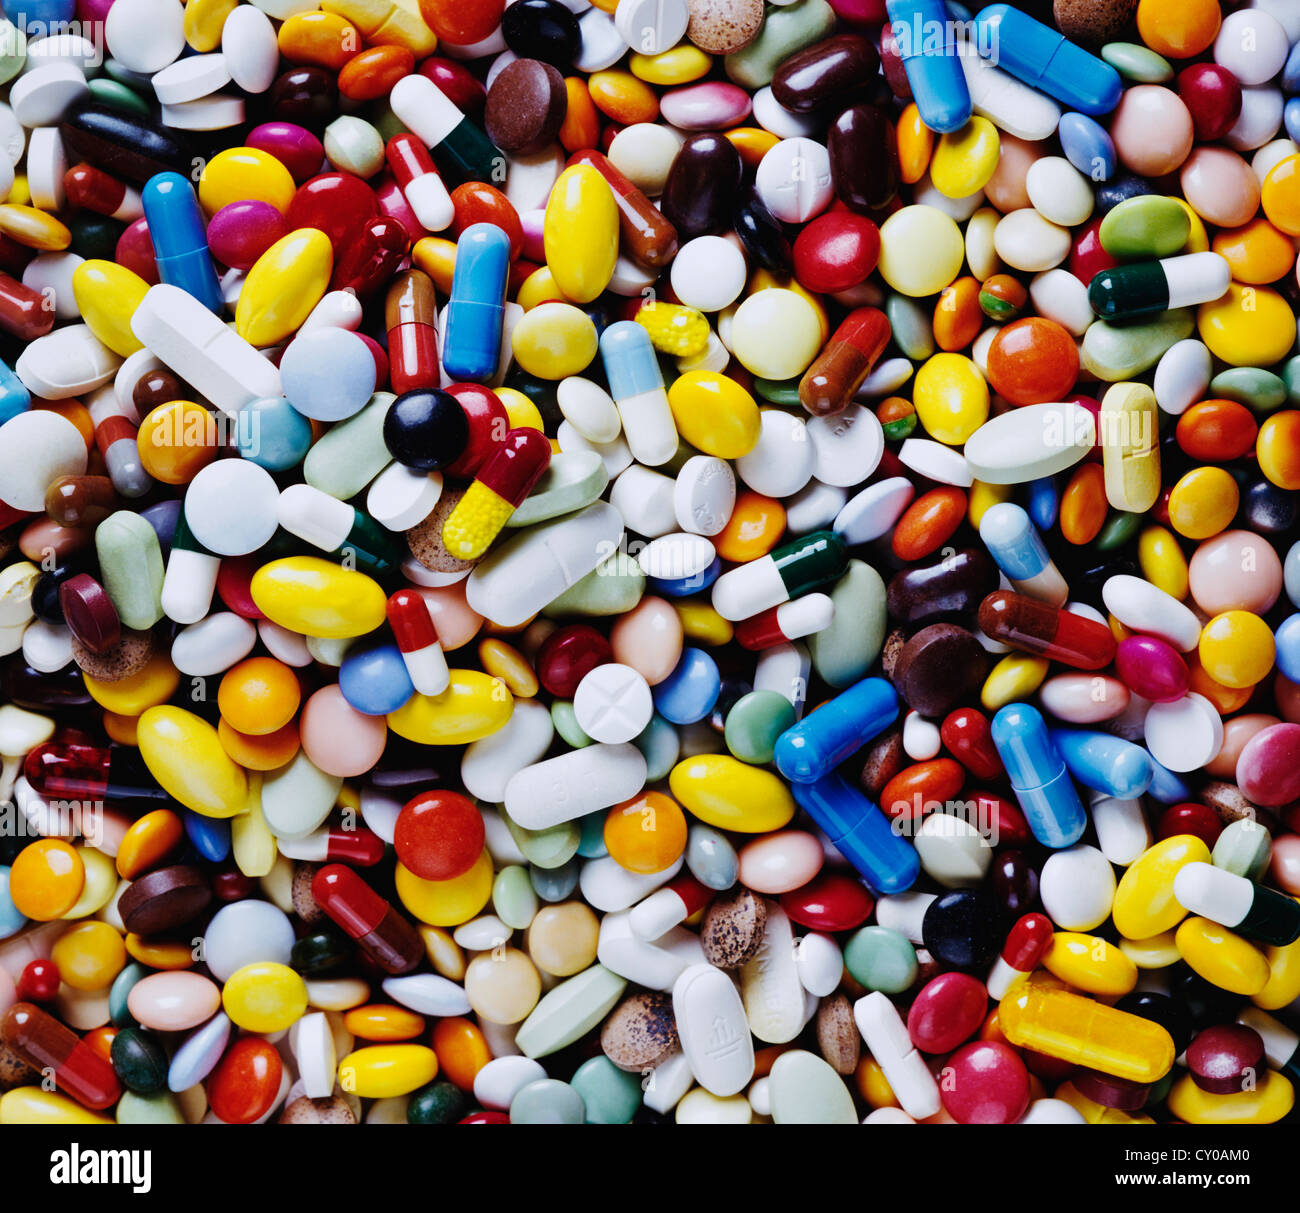 Colourful pile of tablets, medicines, expired, special waste Stock Photo